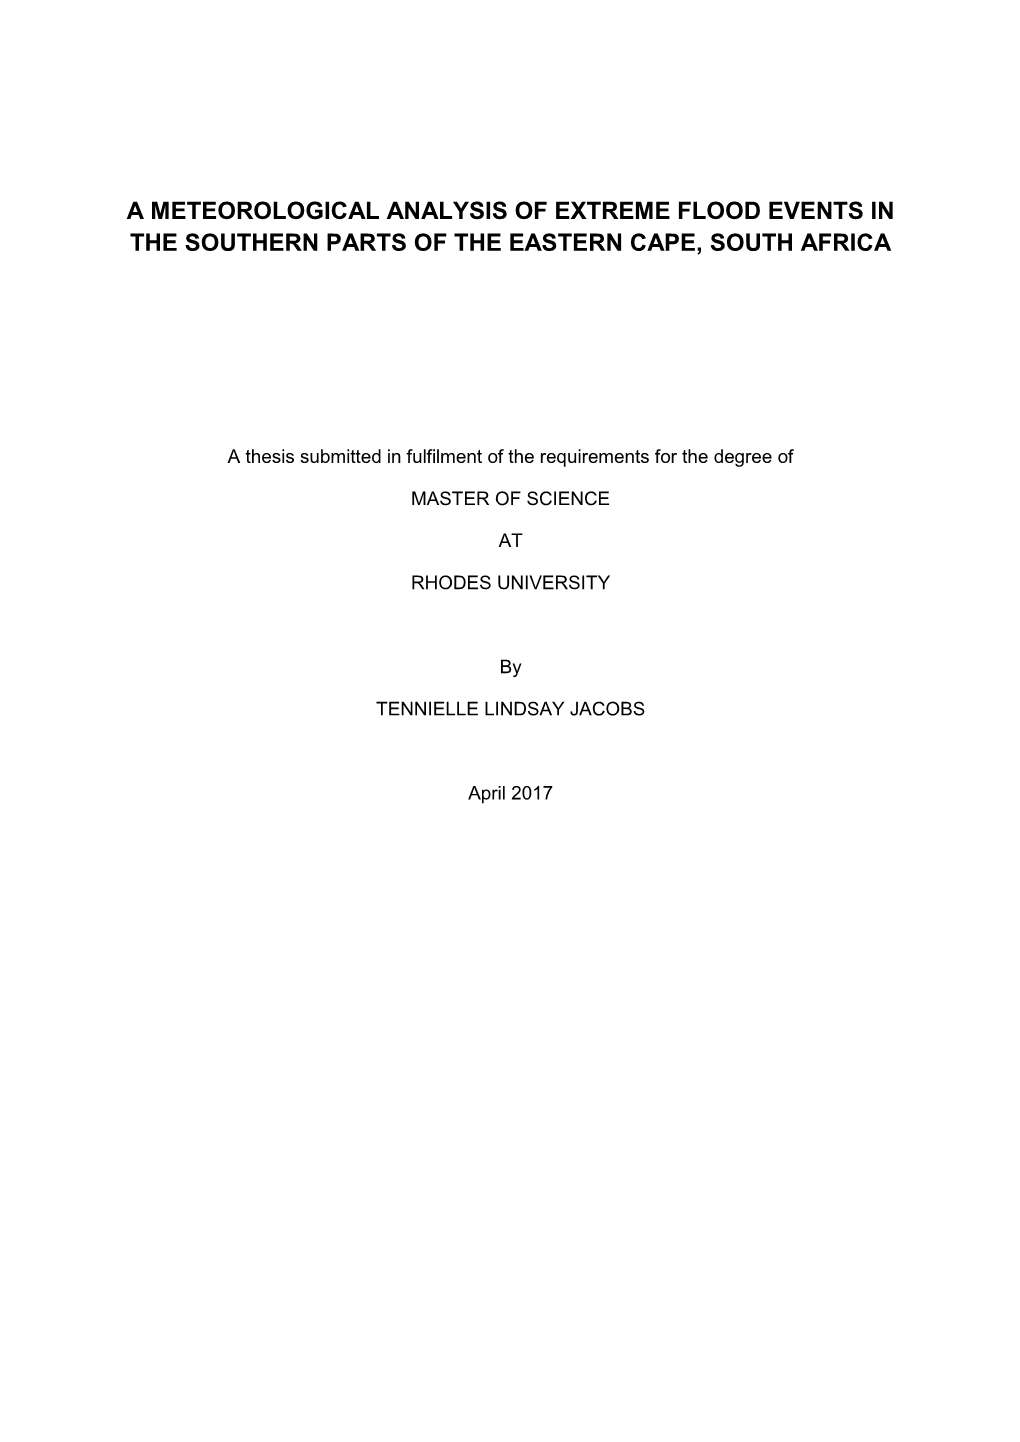 A Meteorological Analysis of Extreme Flood Events in the Southern Parts of the Eastern Cape, South Africa